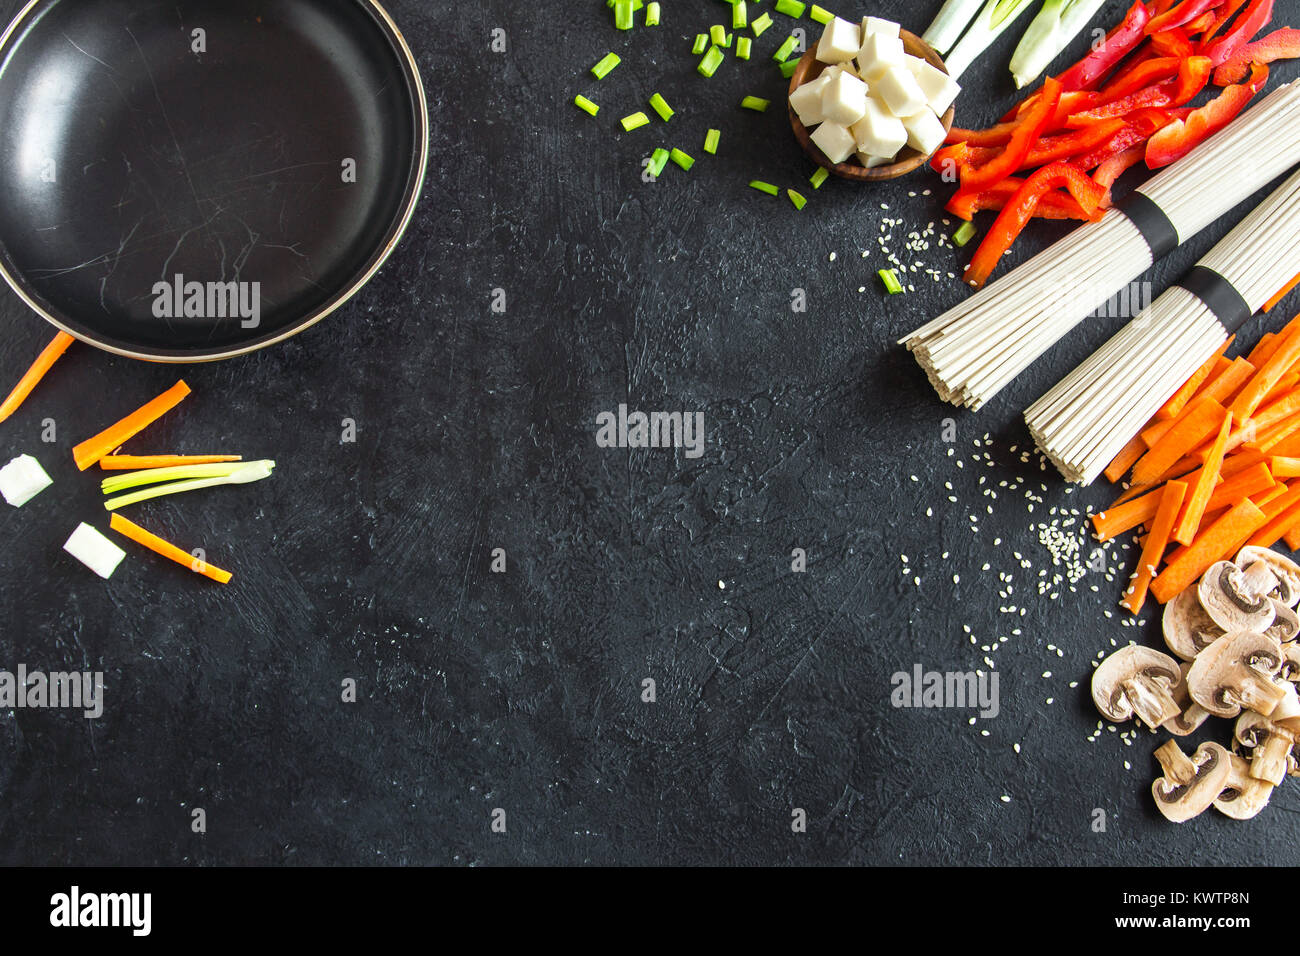 Vegetarian cooking ingredients for stir fry with tofu, noodles and vegetables. Asian vegan cuisine ingredients over black stone background with copy s Stock Photo